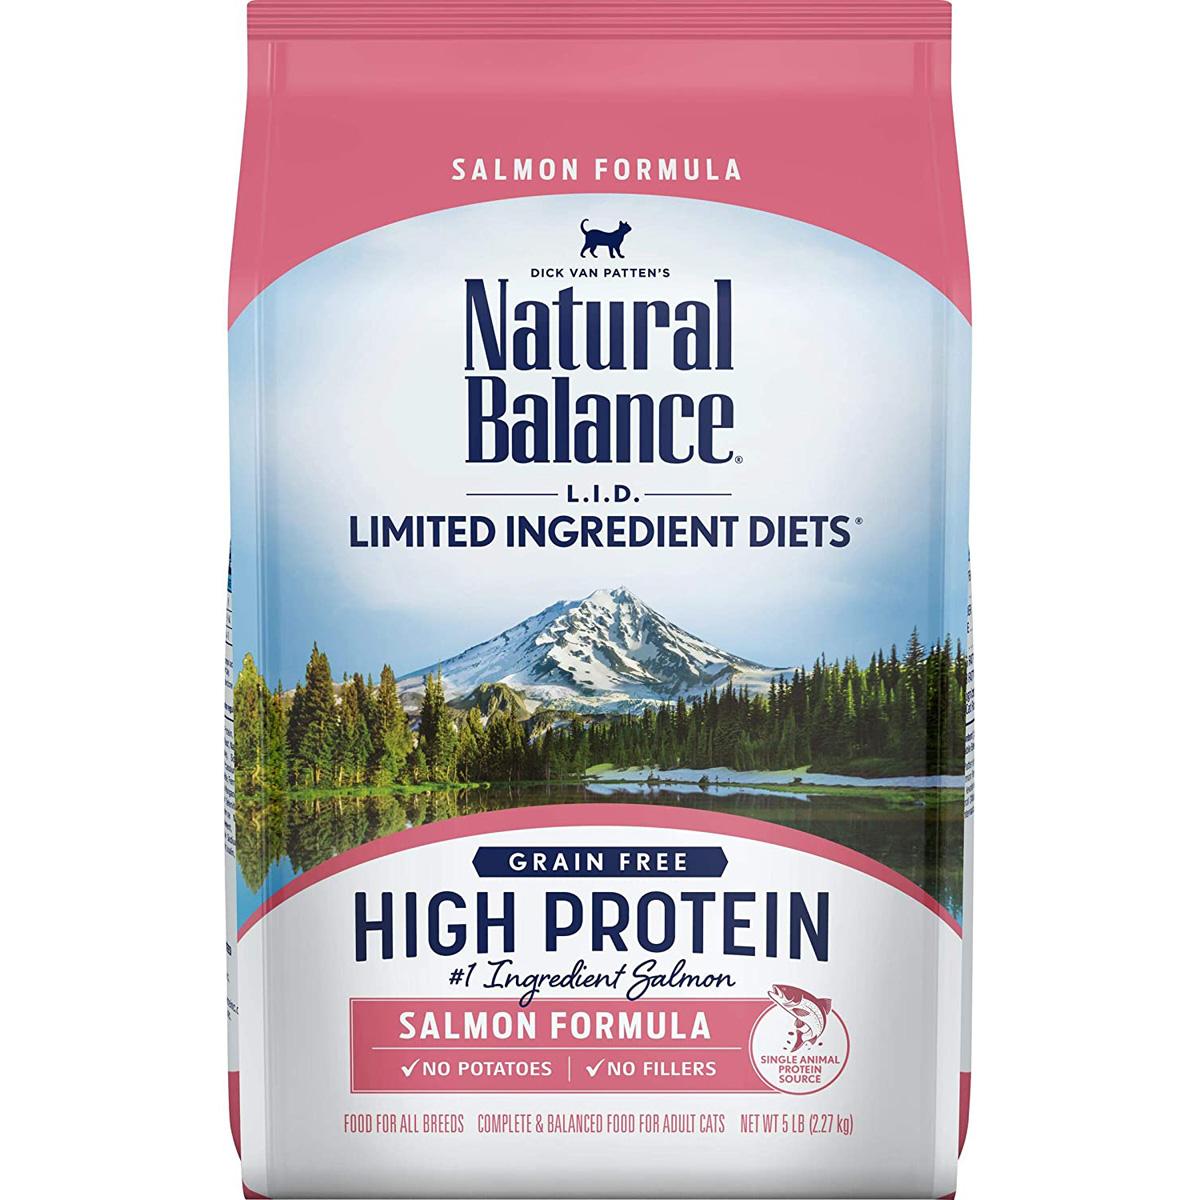 5lbs Natural Balance LID High Protein Dry Cat Food for $10.20 Shipped